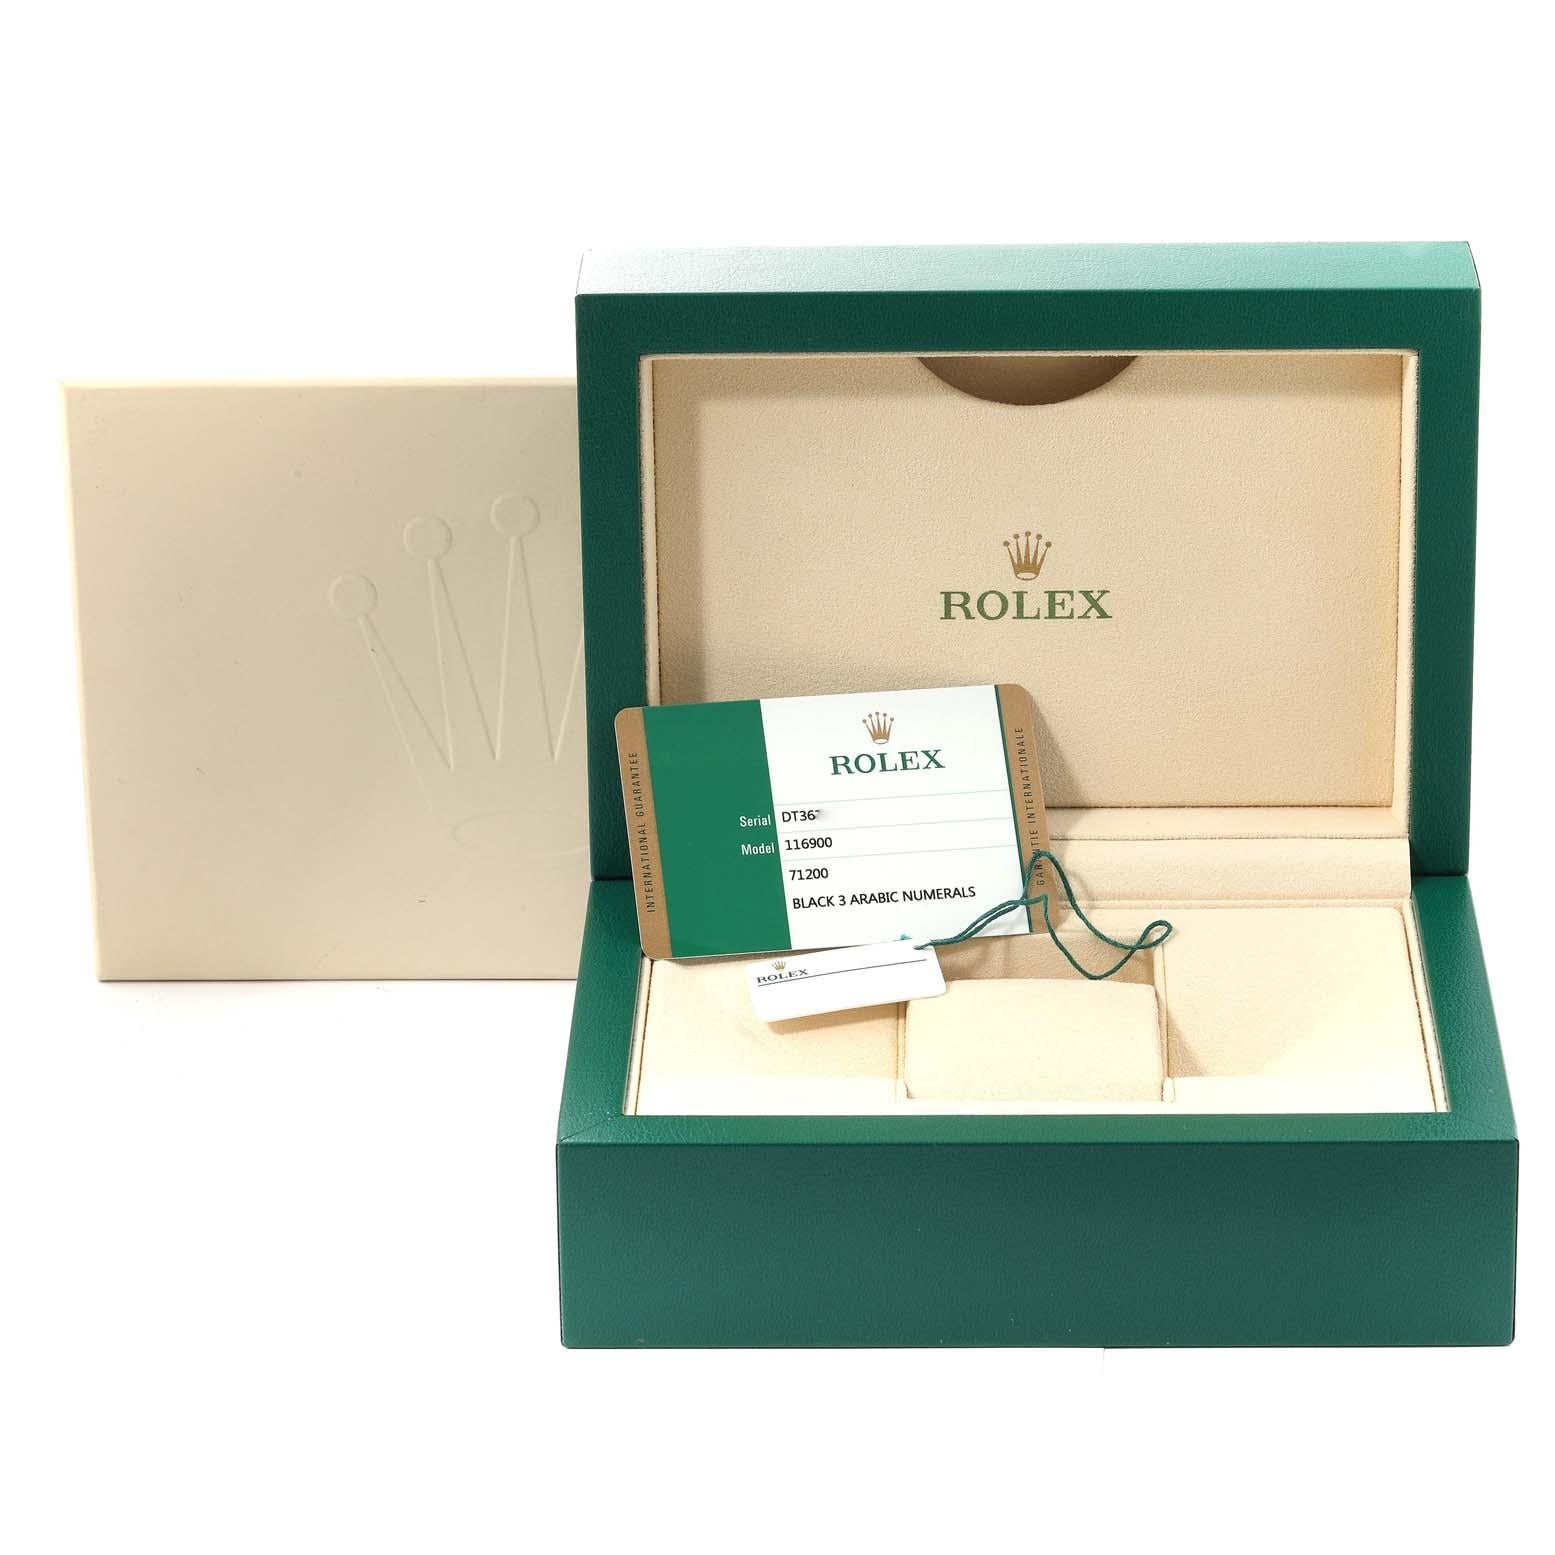 Rolex Oyster Perpetual Air King Green Hand Steel Mens Watch 116900 Box Card 4